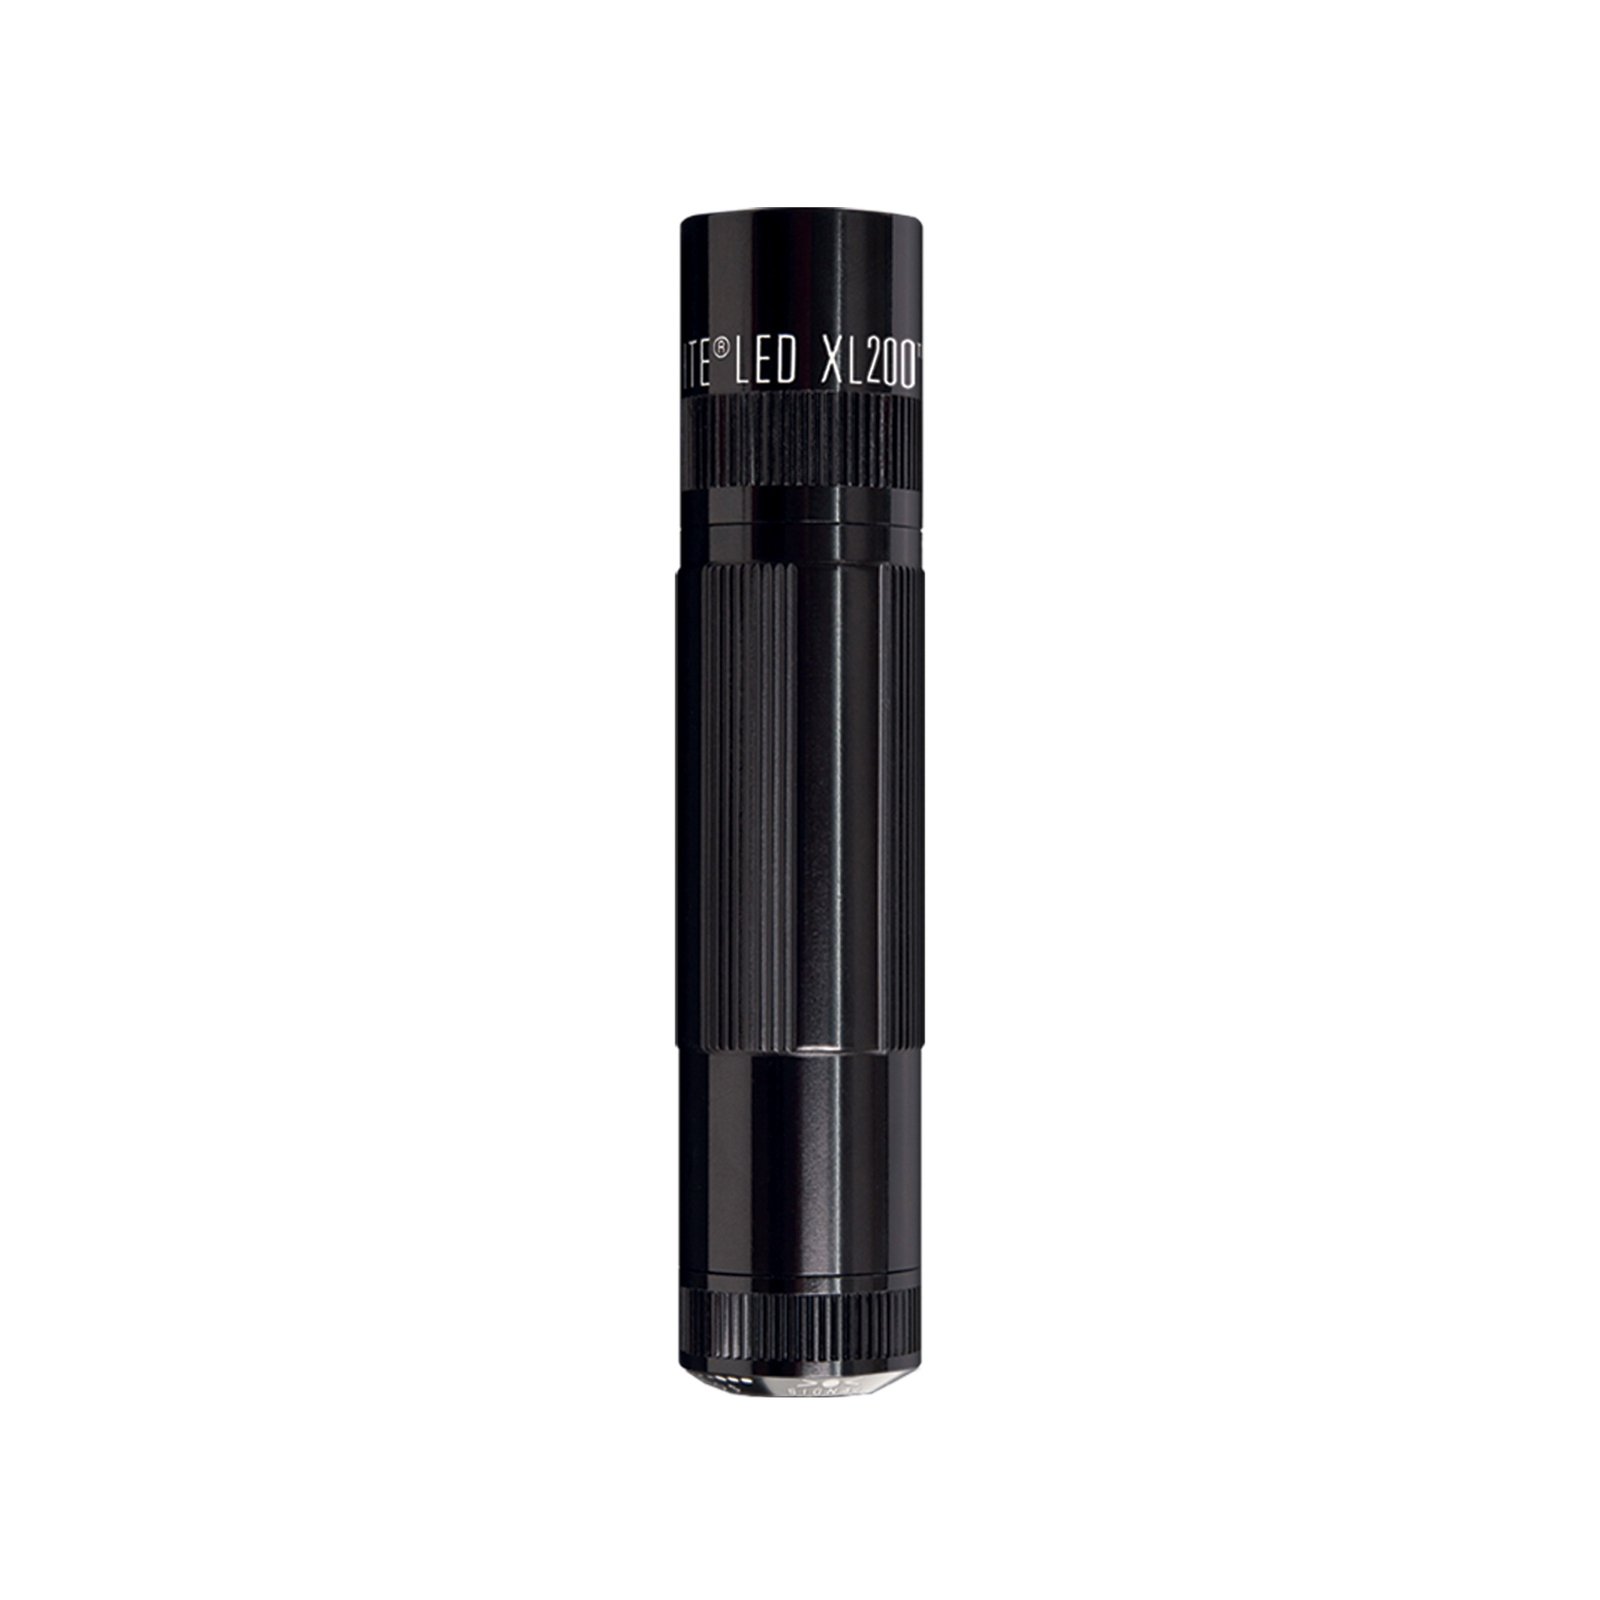 Maglite LED torch XL200, 3-Cell AAA, black